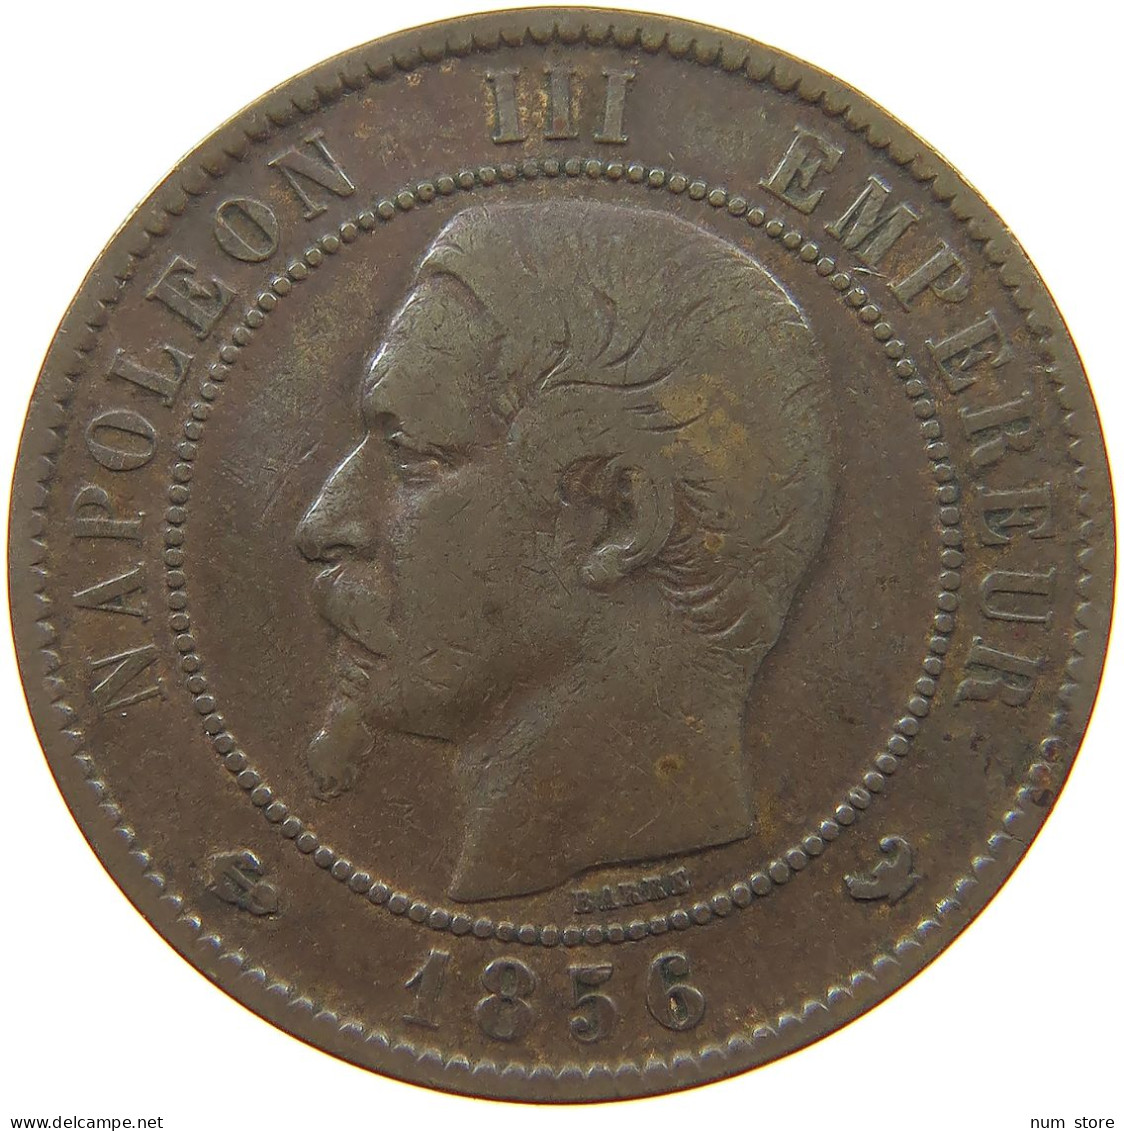 FRANCE 10 CENTIMES 1856 W Napoleon III. (1852-1870) #a041 0357 - 10 Centimes